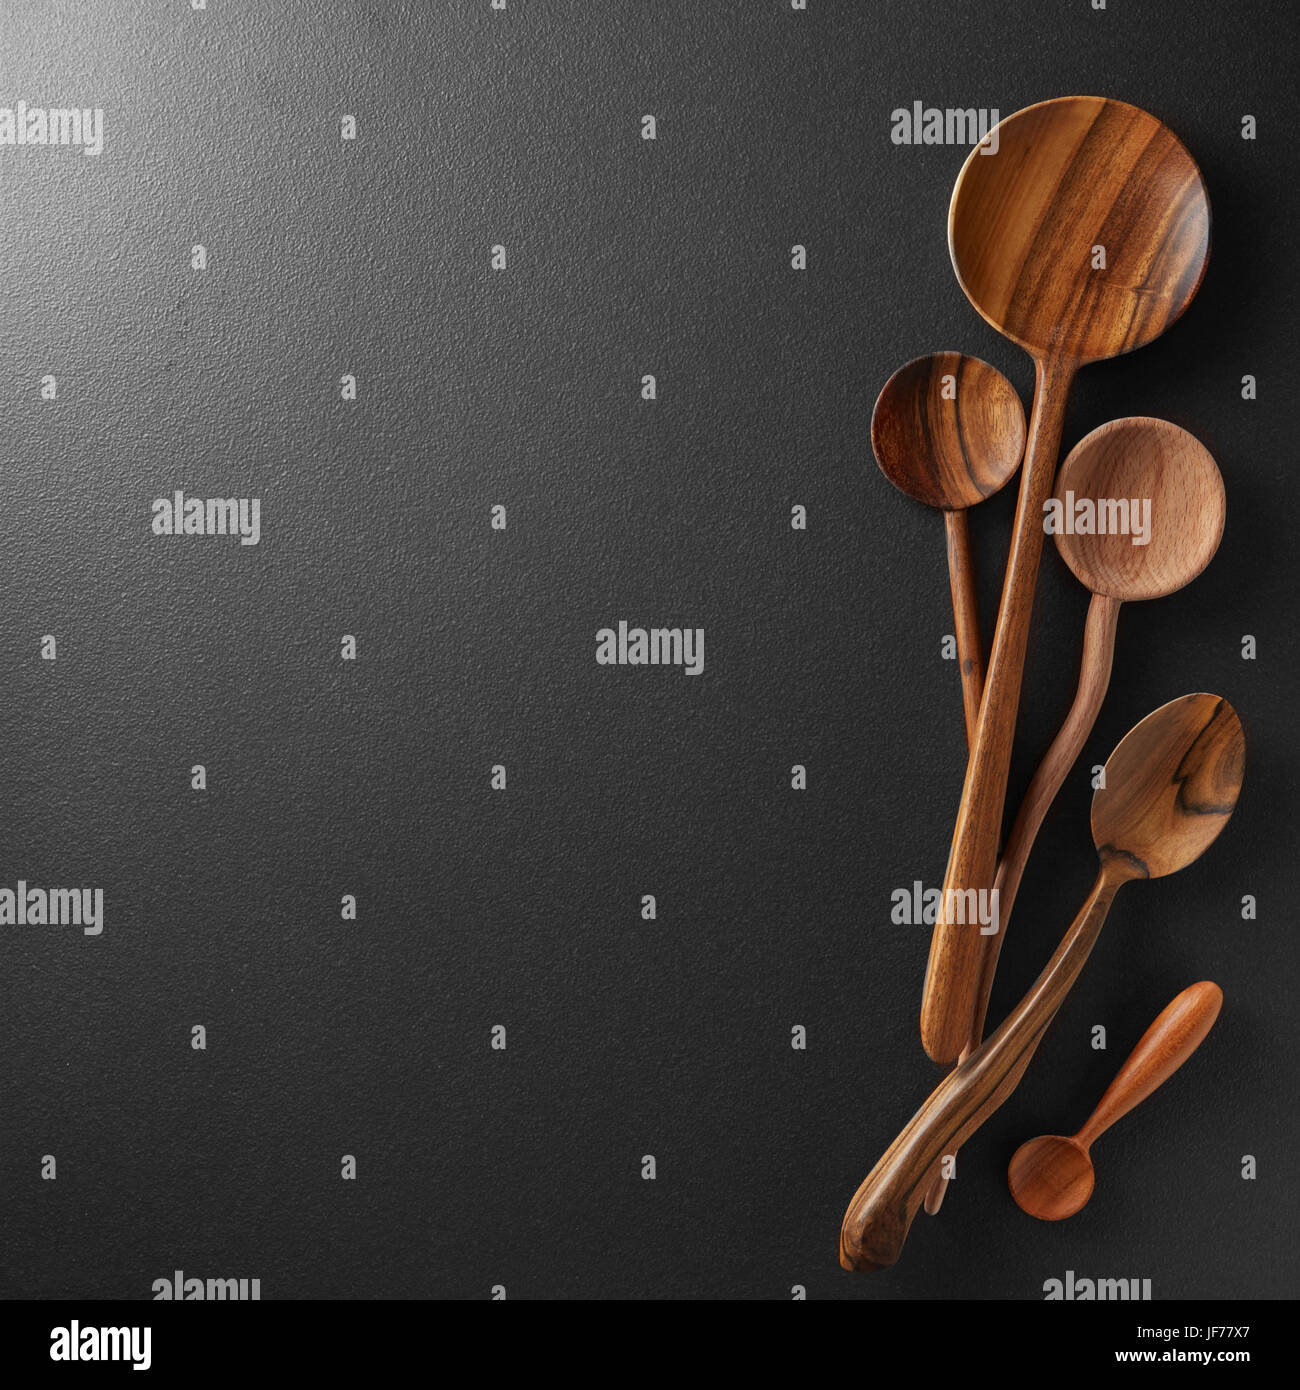 Wood spoons on black board background Stock Photo